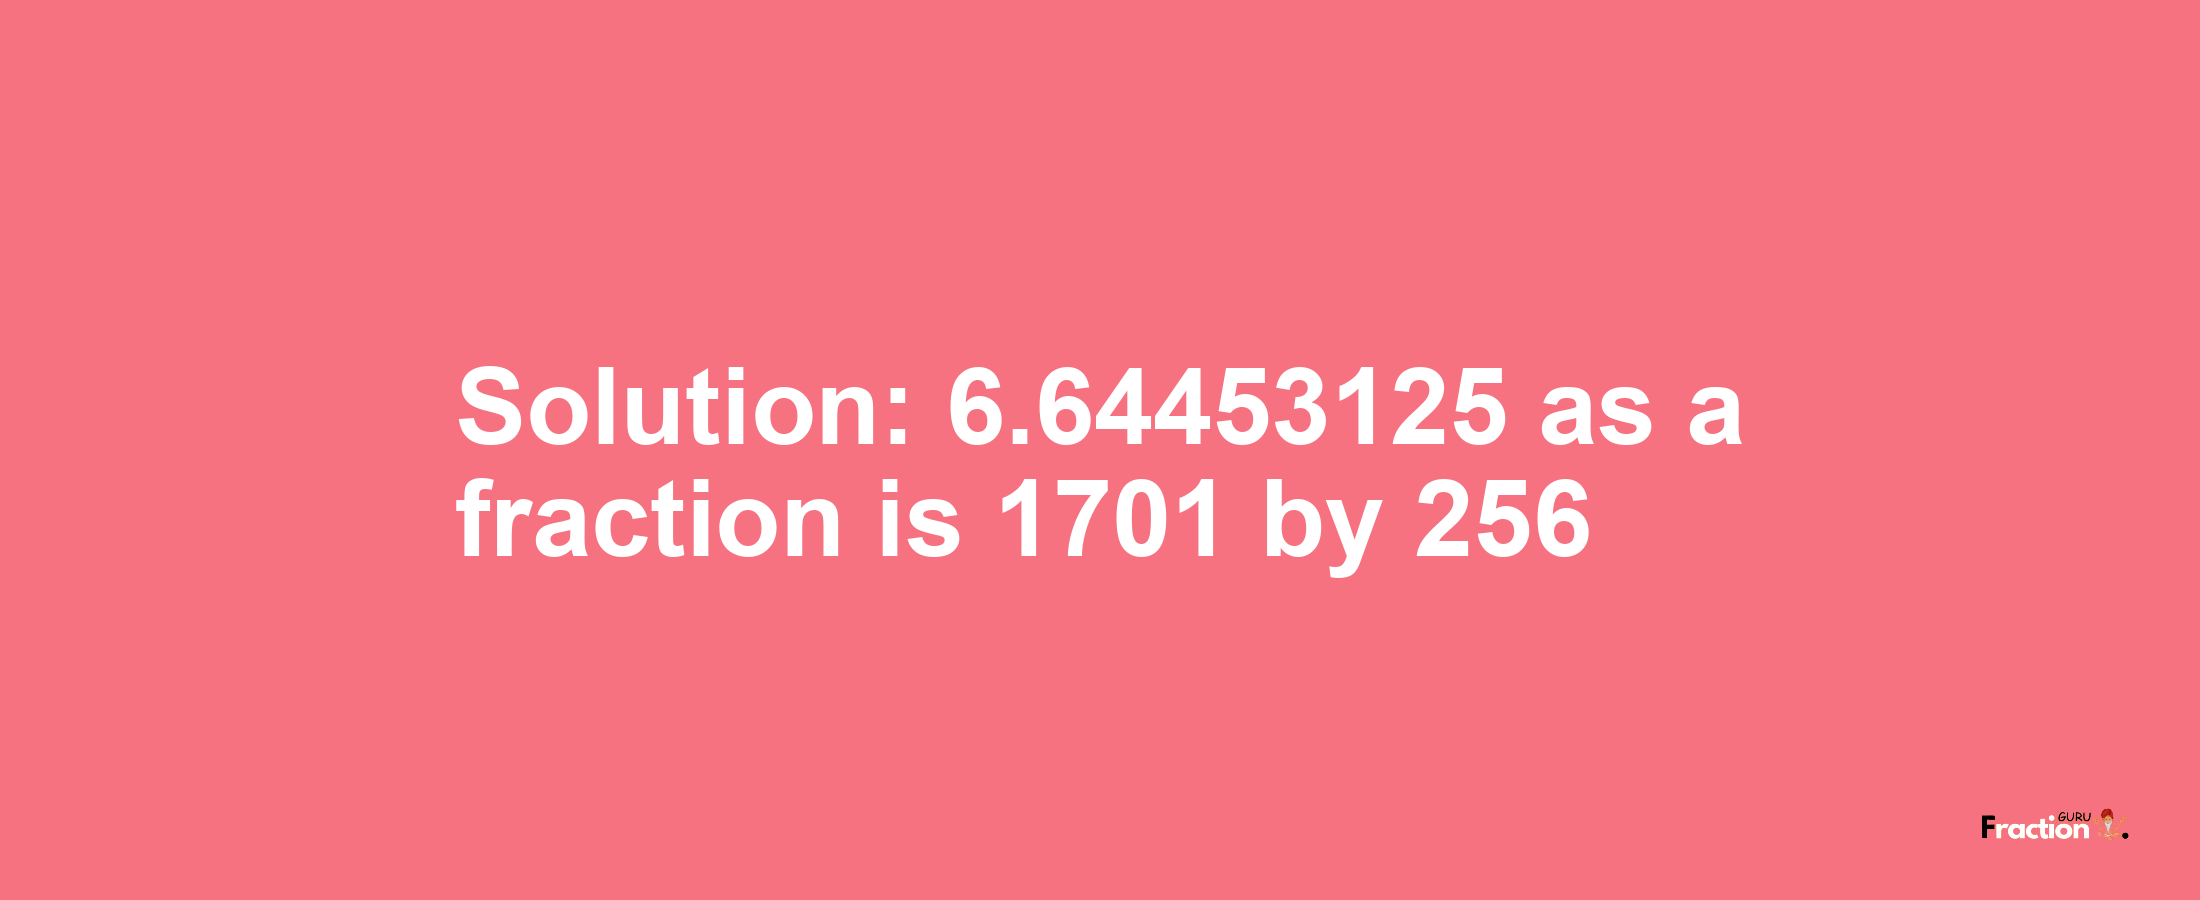 Solution:6.64453125 as a fraction is 1701/256